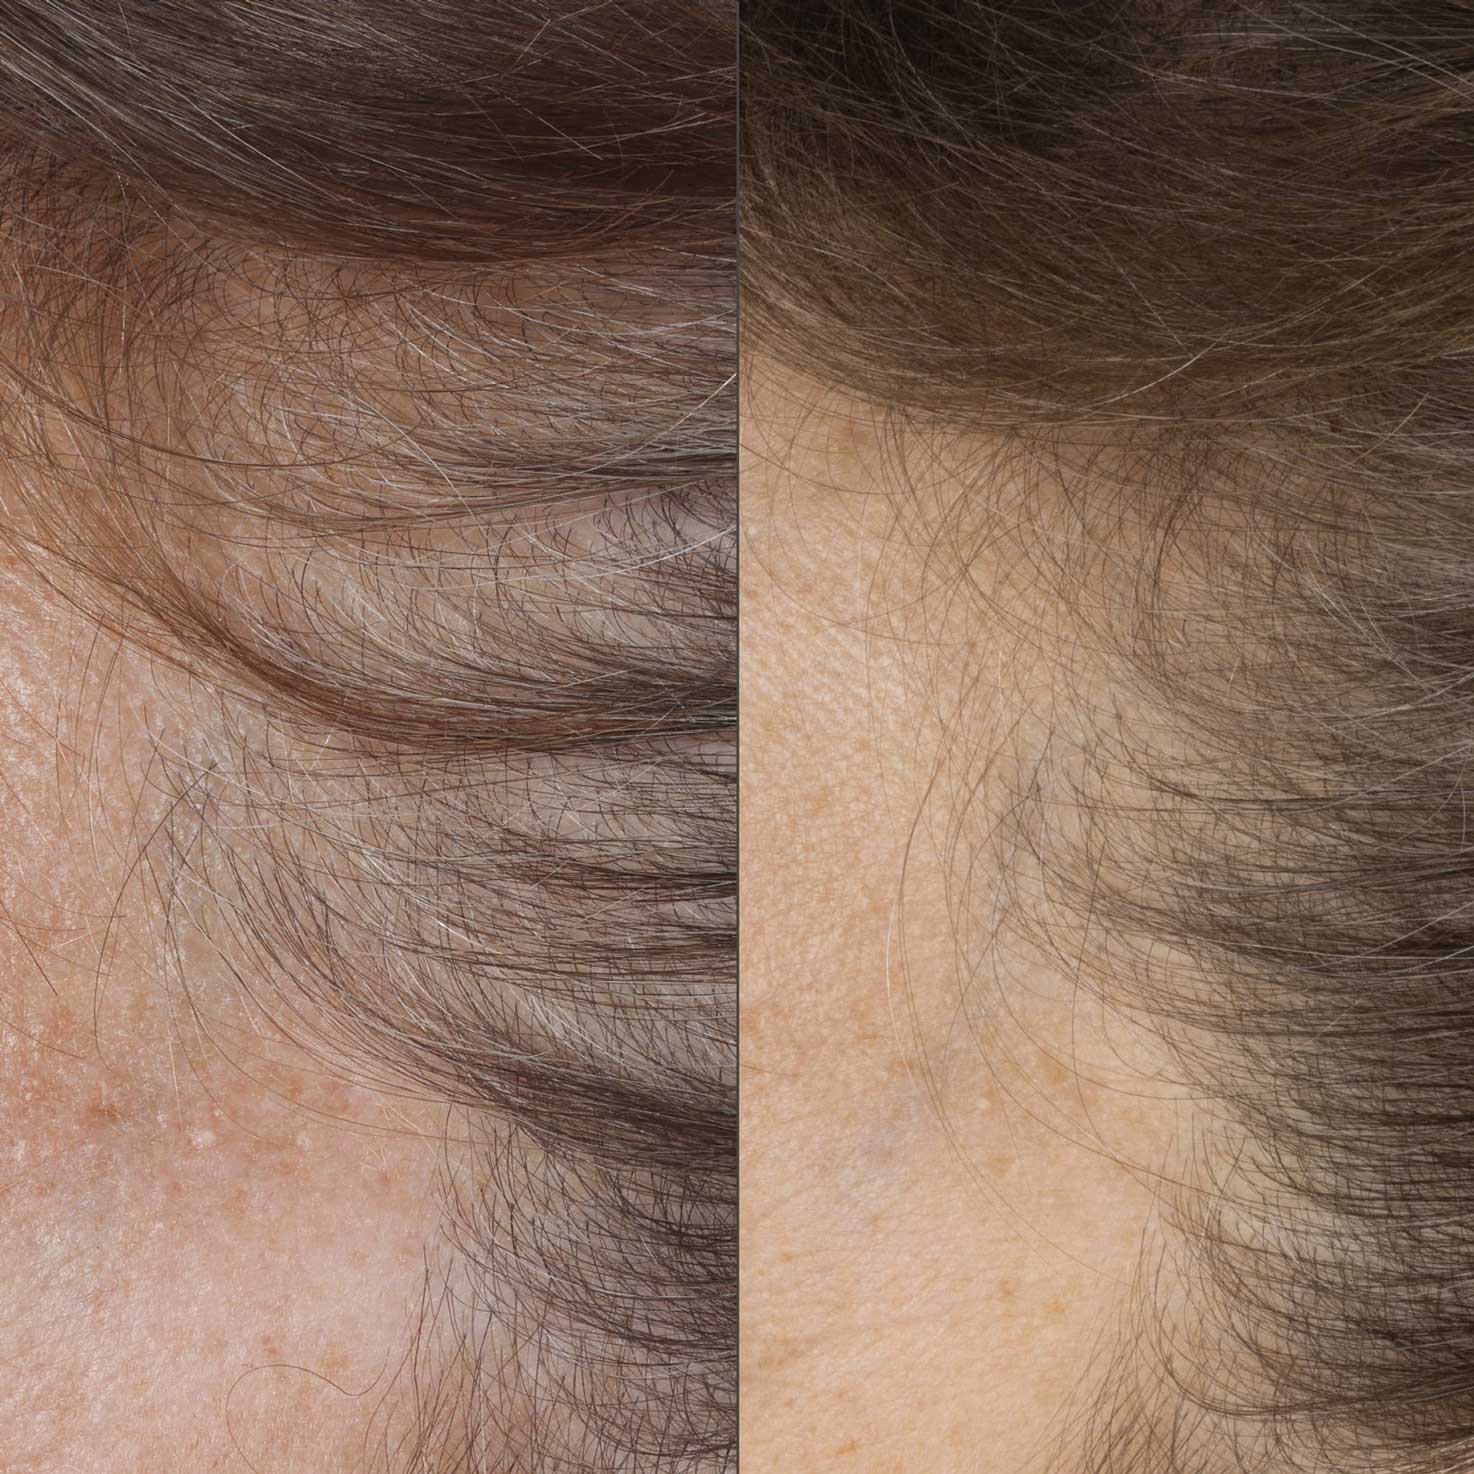 Close up of before and after image of brown haired woman with thin hair and hair growth results over 16 weeks. 